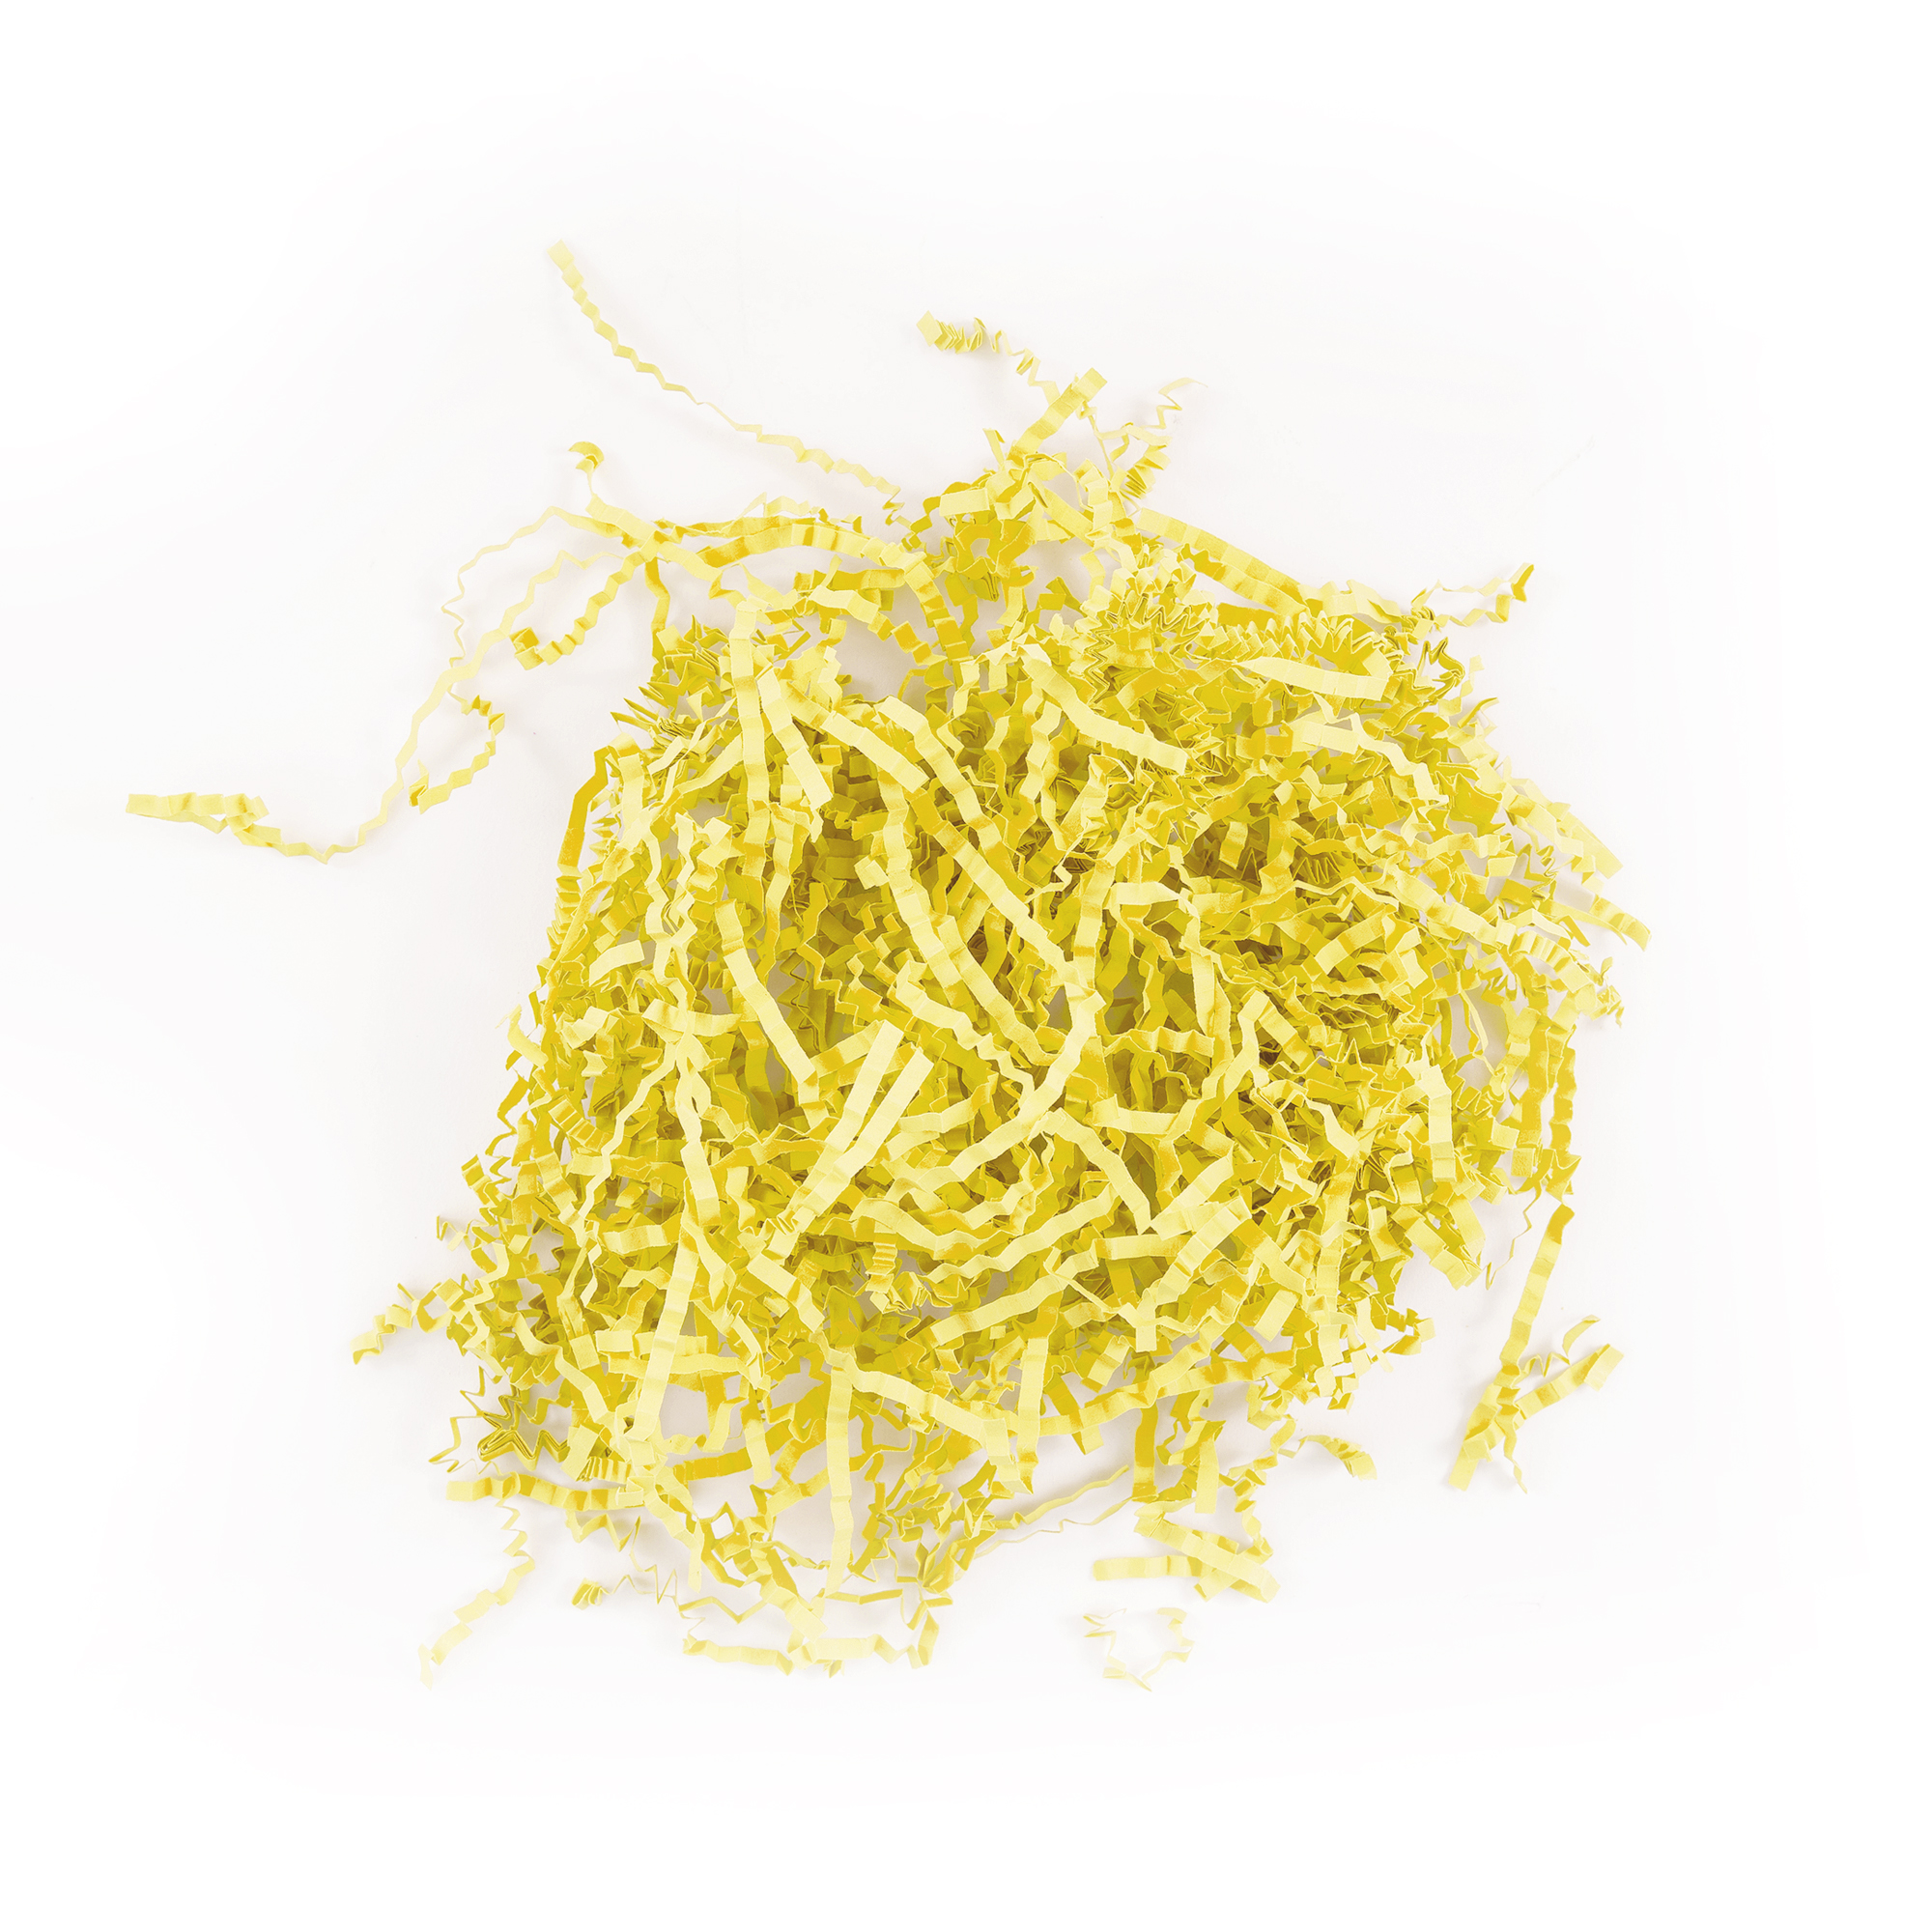 Paper Shred 8 oz - Yellow